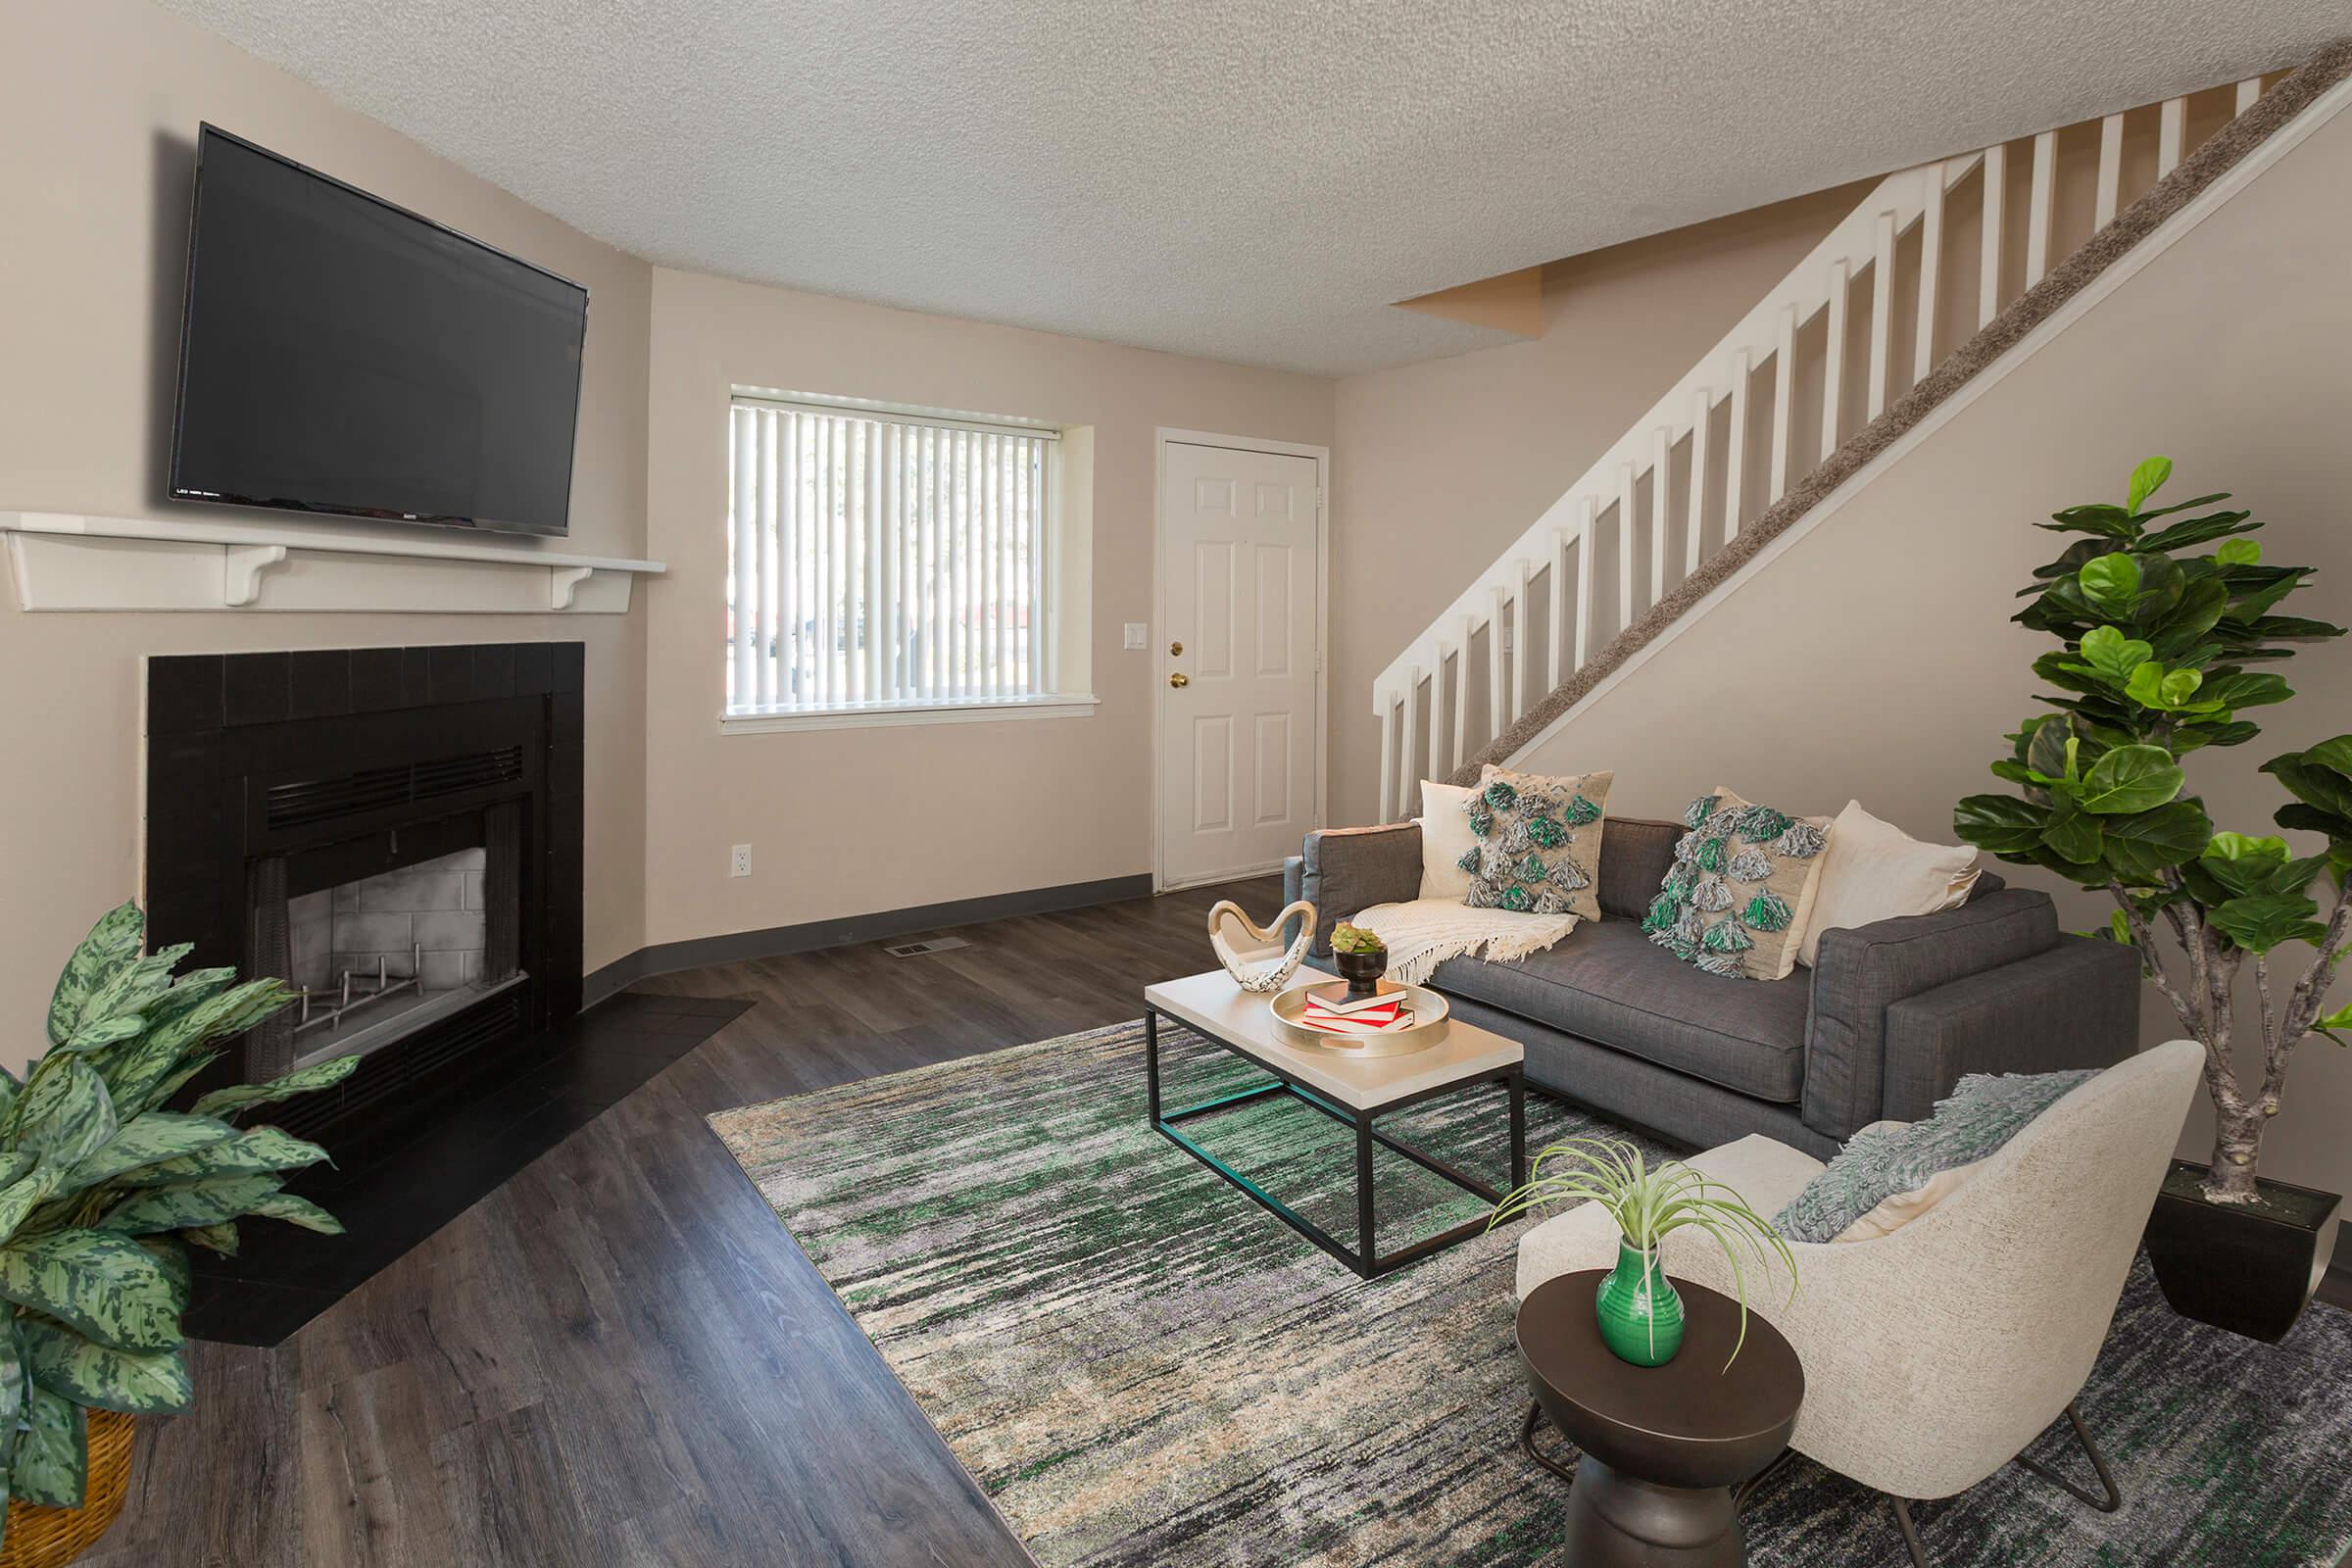 SPACIOUS FLOOR PLANS AT WOODSIDE APARTMENT HOMES